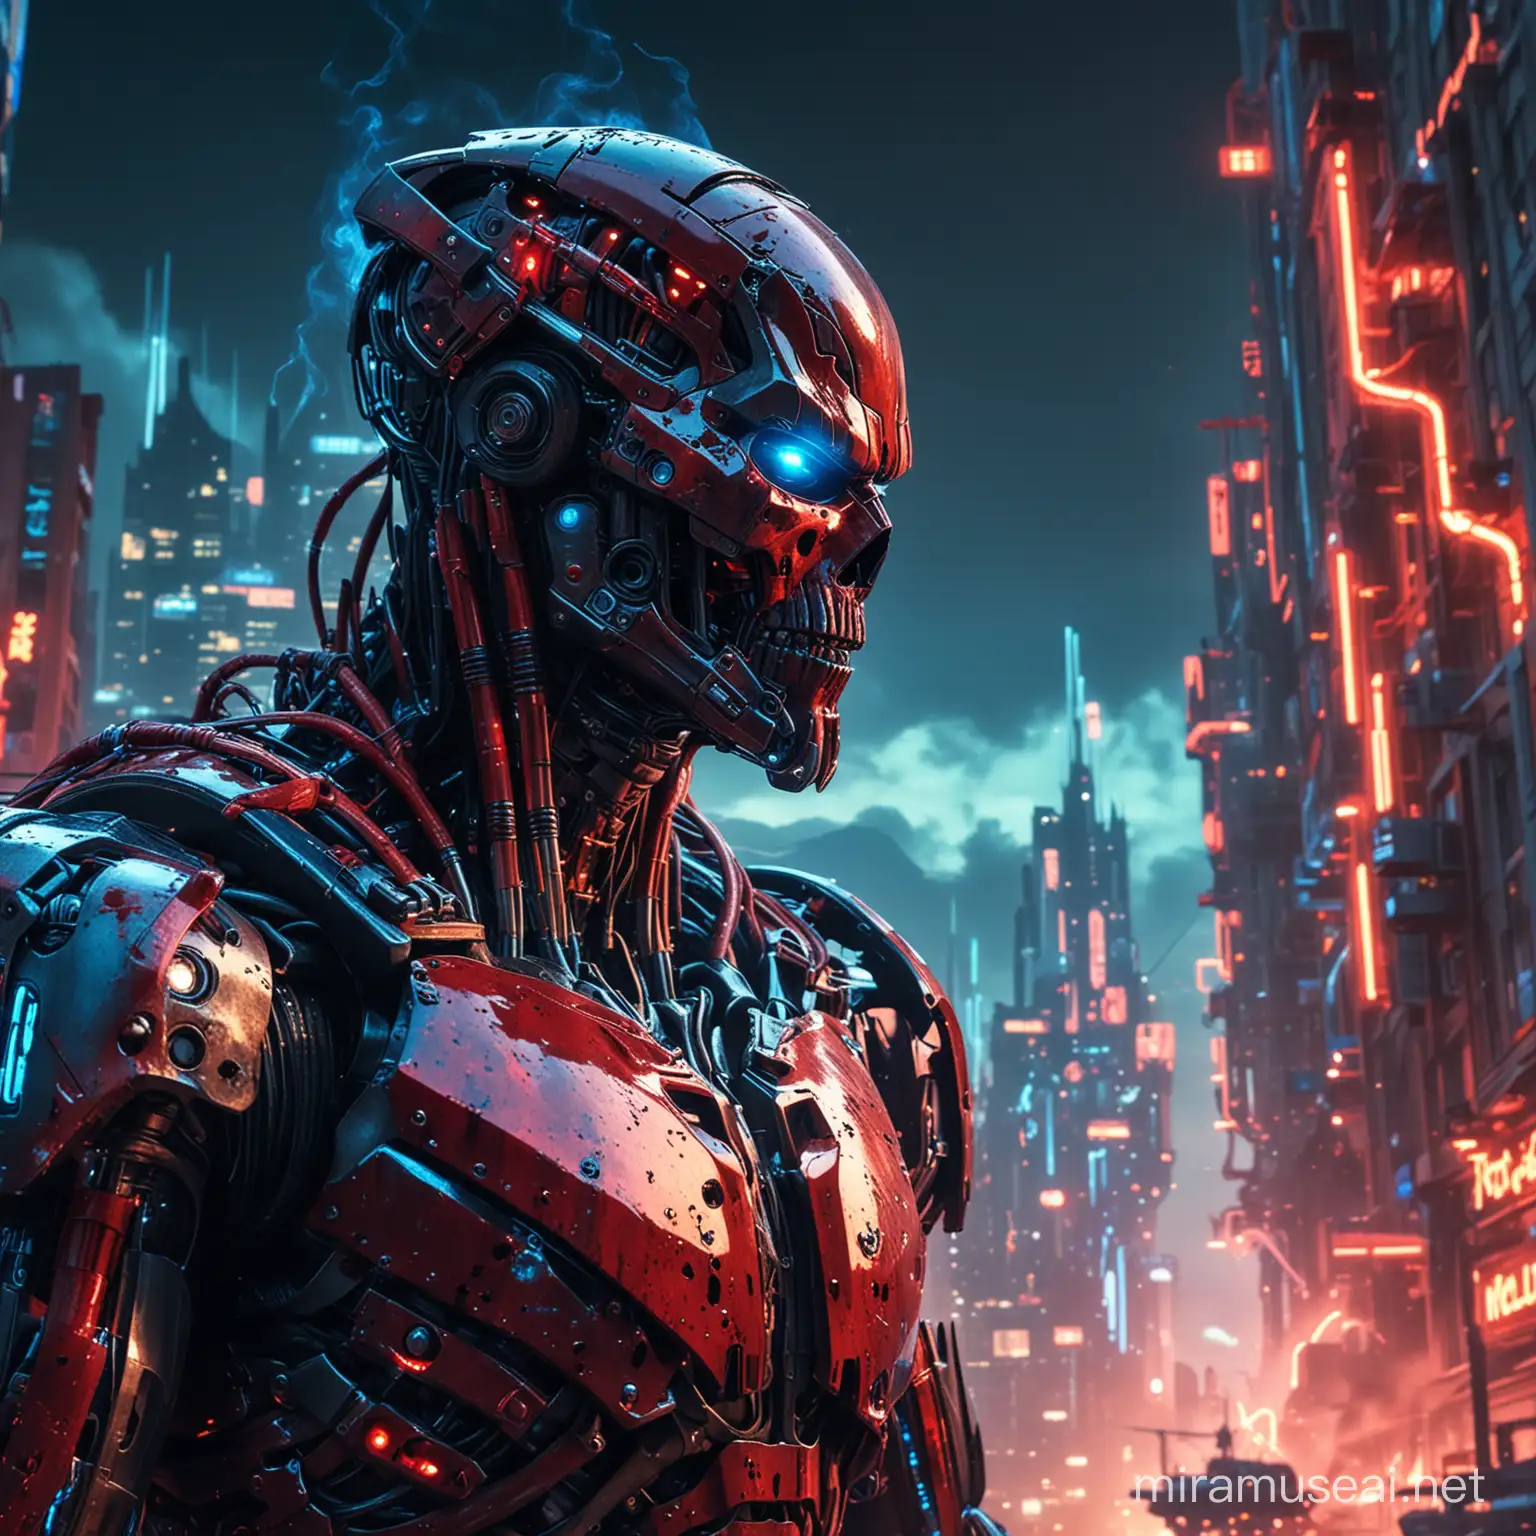 An extreme close up of a menacing, scary, evil Terminator with extremely reflective and shiny, blood red exoskeleton amidst a stunningly beautiful, densely built, neon blue and red colored futuristic, alien city with giant citadels, incandescent lightning, laser blasts, multiple luminescent explosions, smoke plumes and stunning lens flares across a gorgeous starlit night sky.